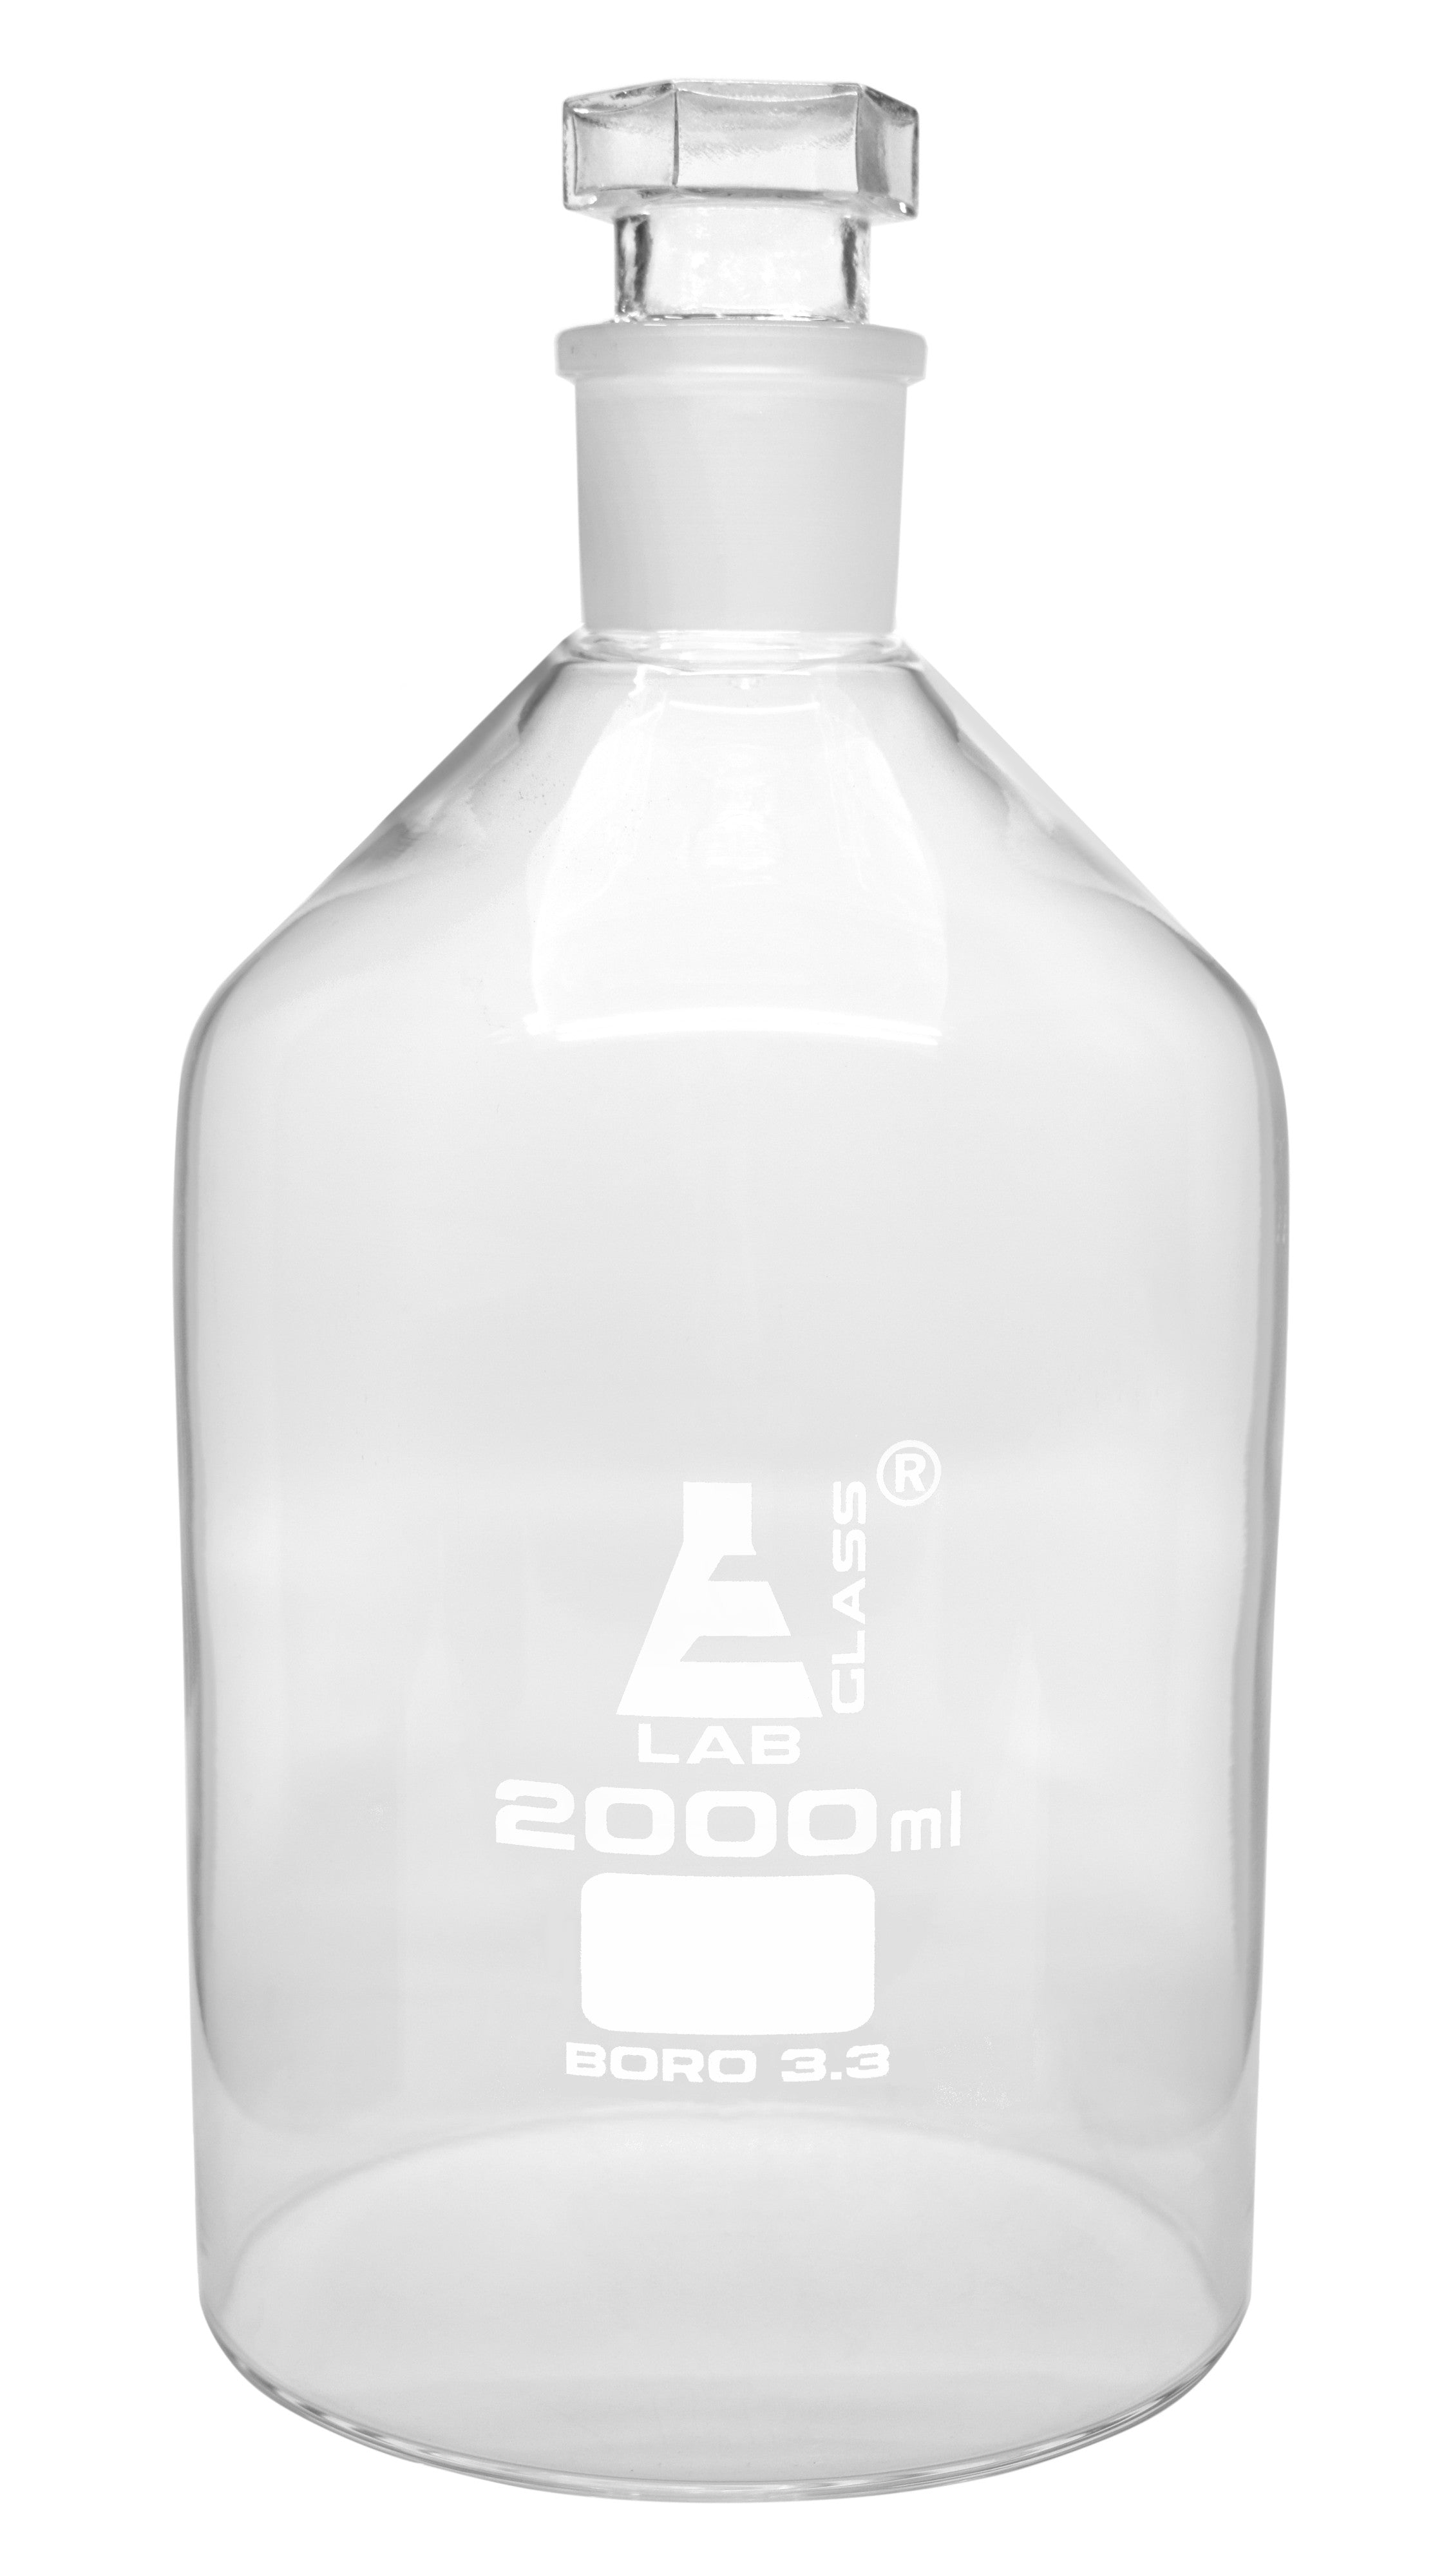 Clear Borosilicate Glass Reagent Bottle with Hollow Glass Stopper, 2000 ml (2 L), Narrow Mouth, Autoclavable